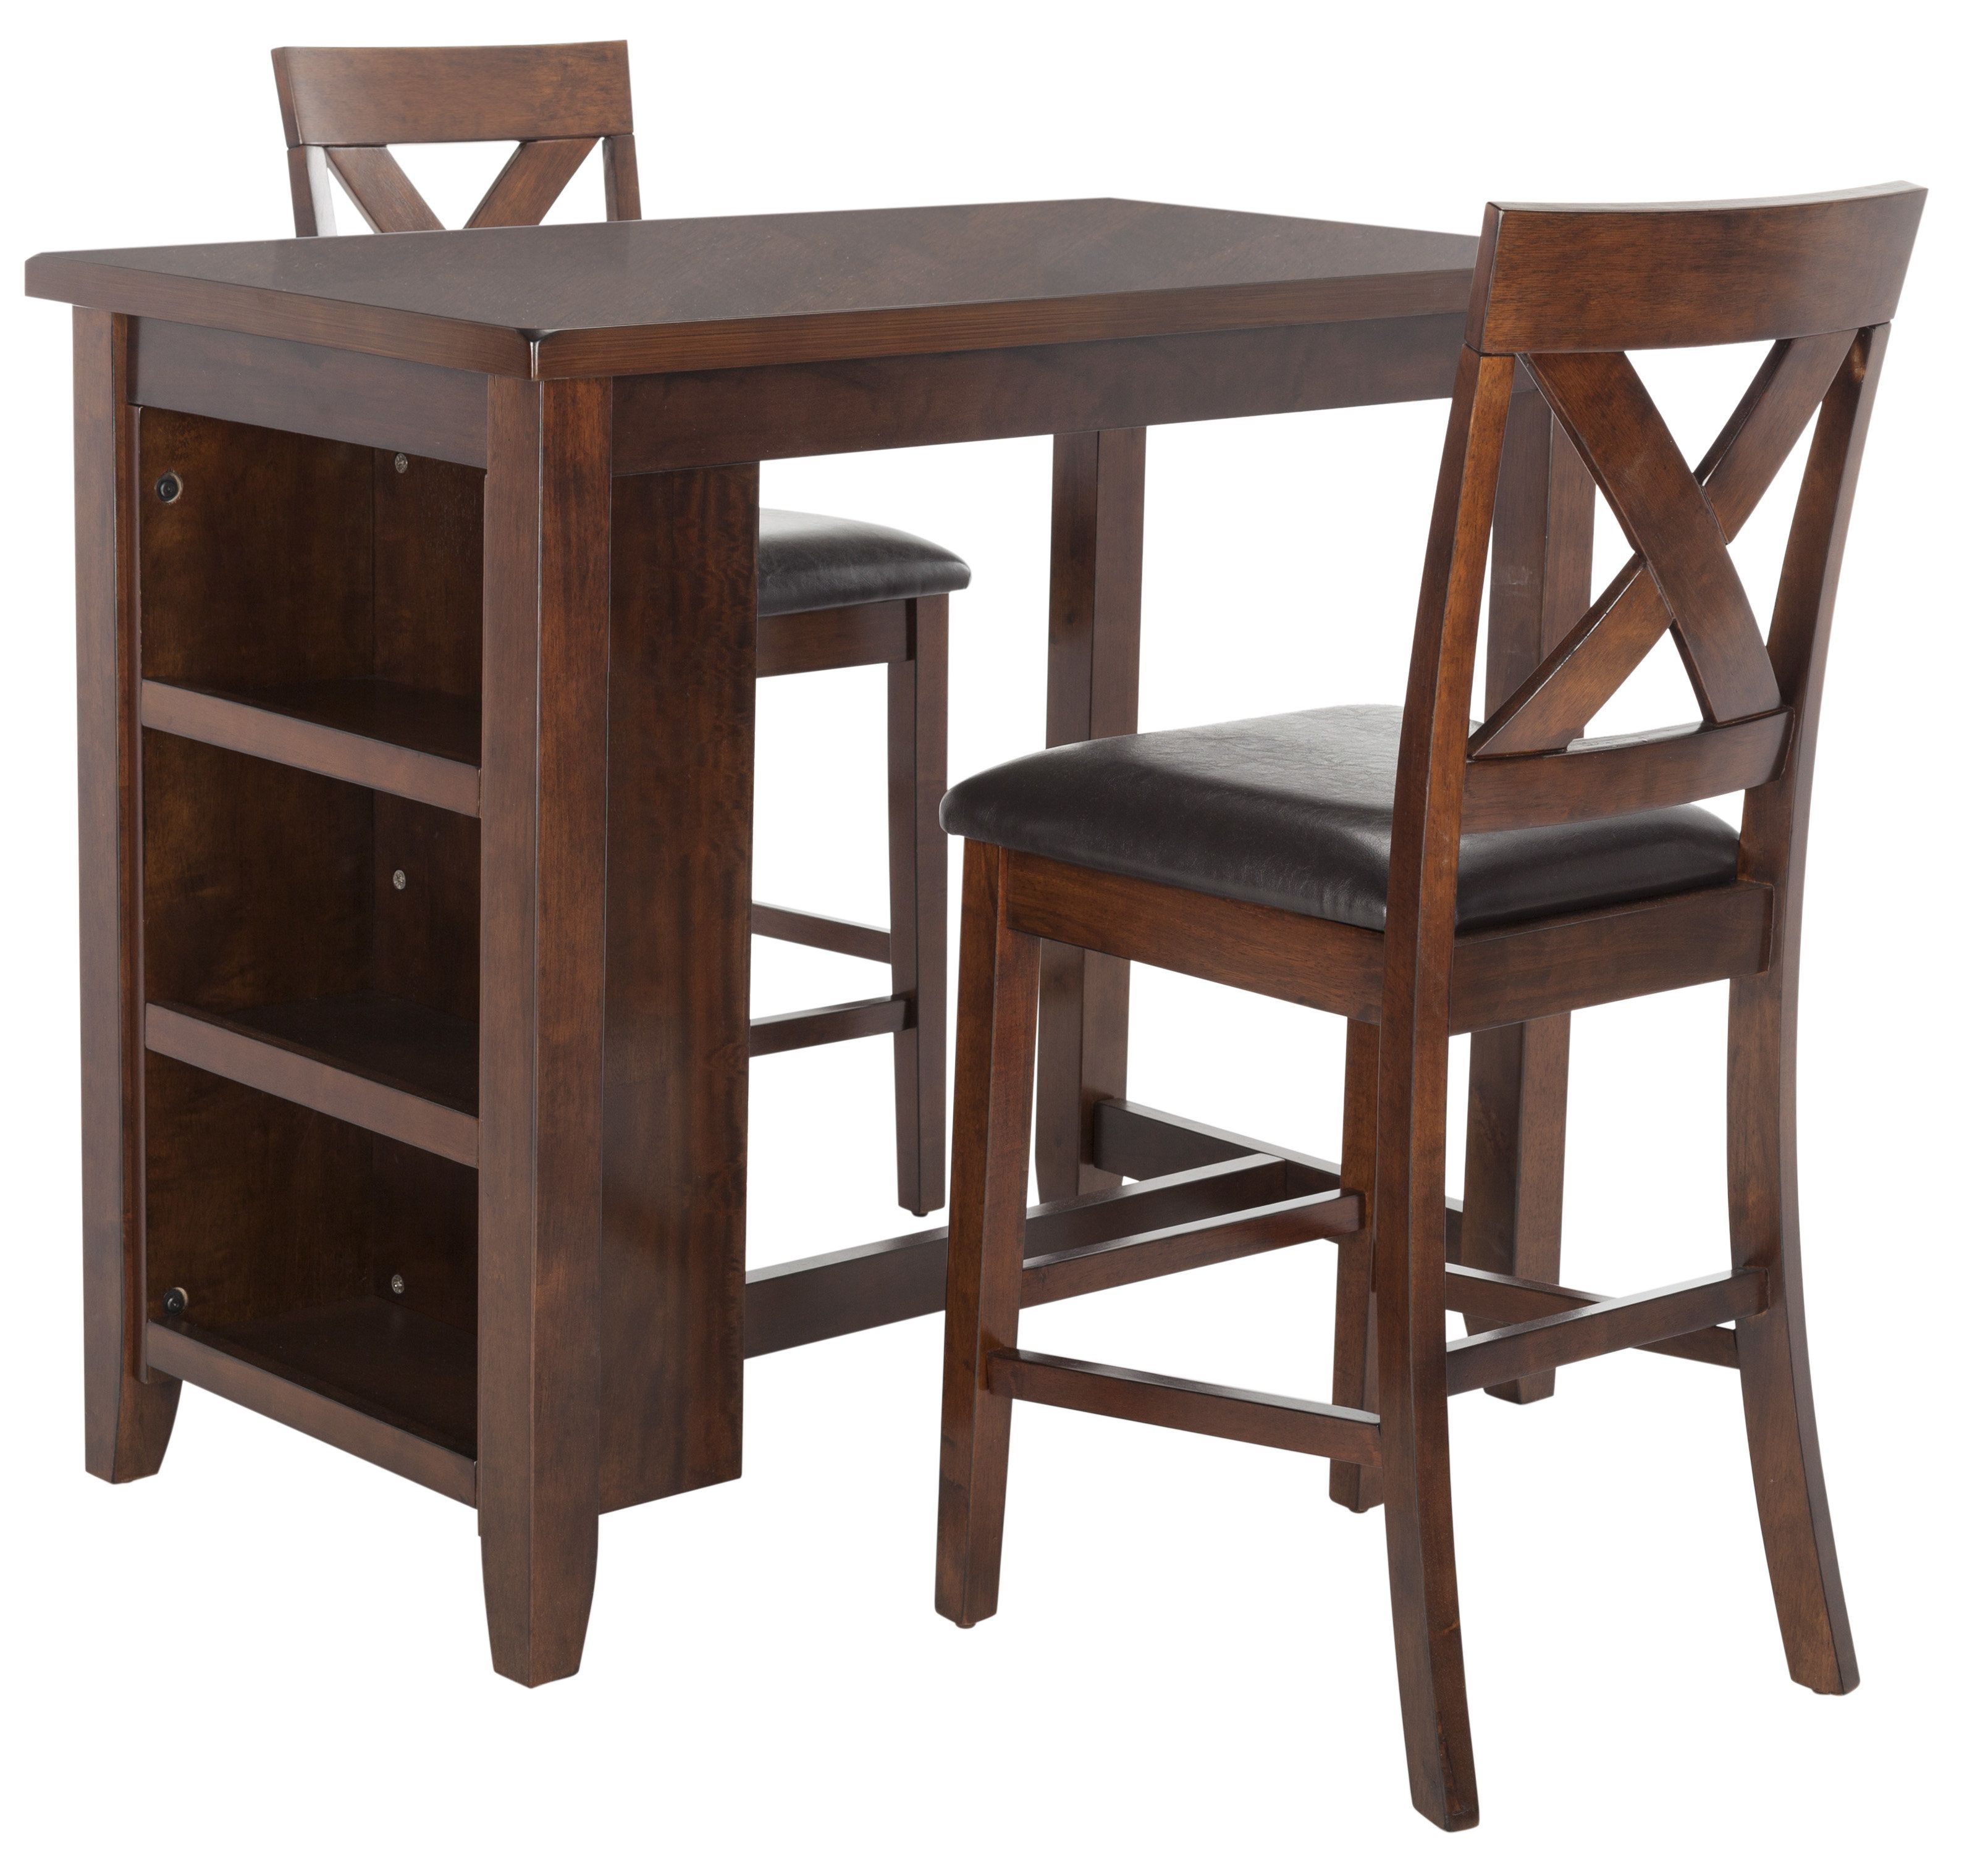 Darby Home Co Renwick 3 Piece Pub Table Set With Regard To Most Up To Date Frida 3 Piece Dining Table Sets (View 7 of 20)